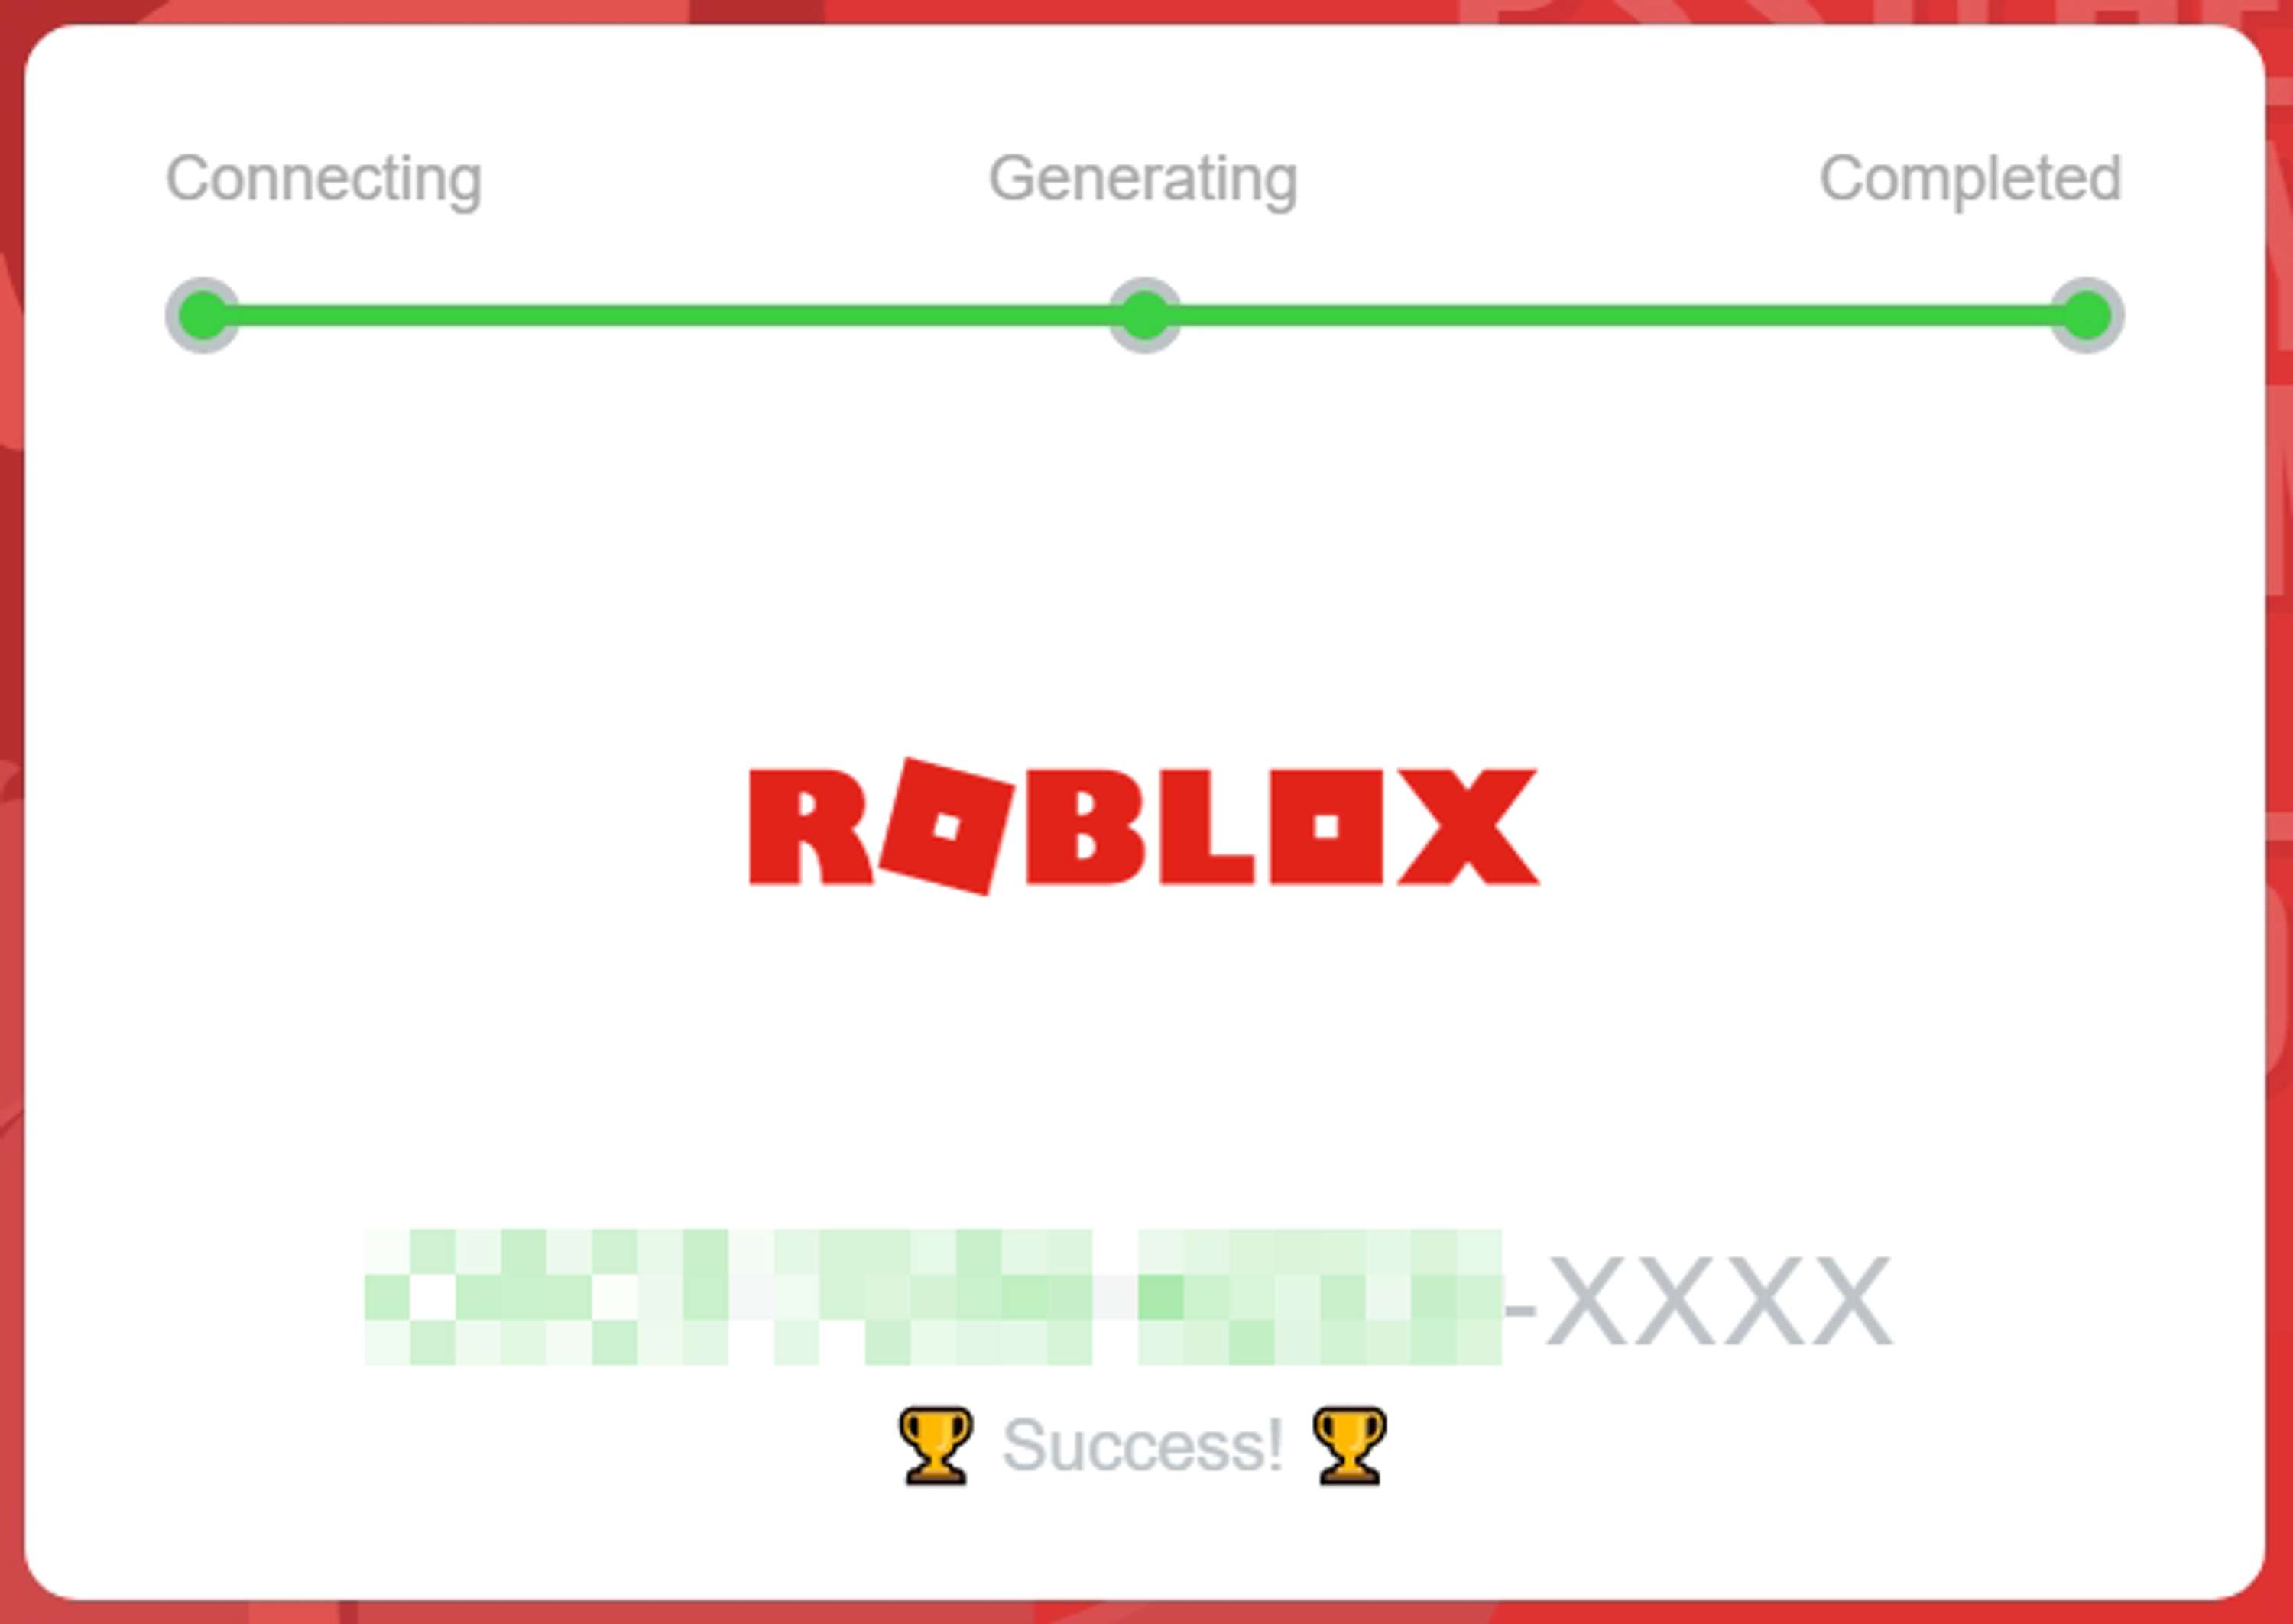 100 Free Roblox Gift Card Codes Generator The Dots - robux gift card codes 2020 not used